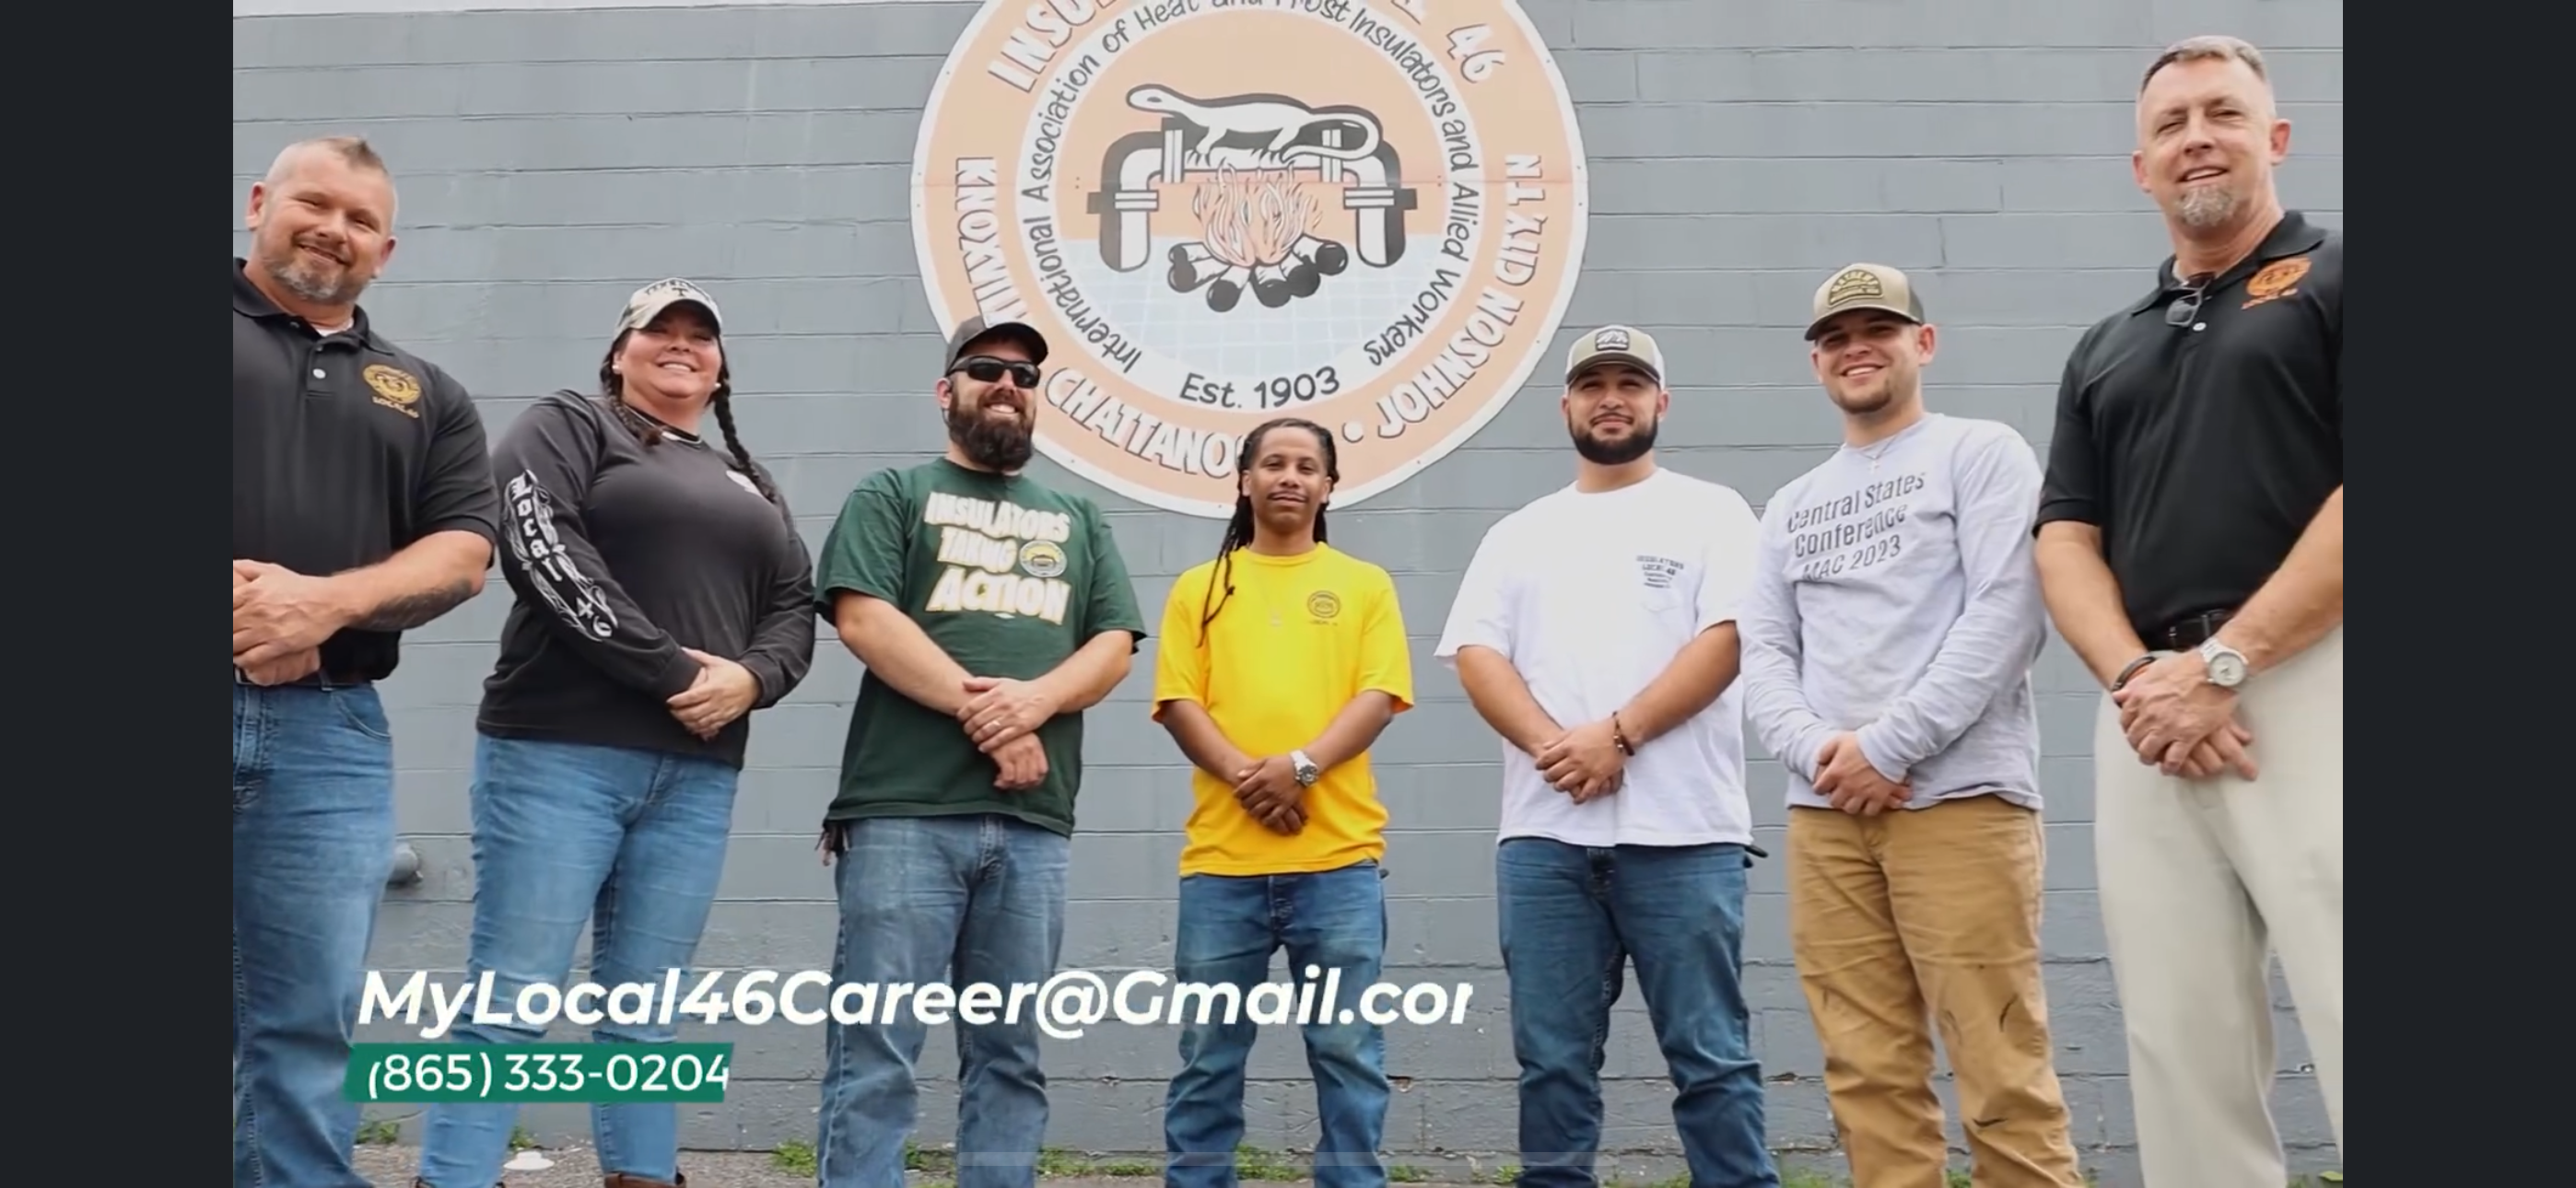 Local 46 Knoxville recruits via TV commercial